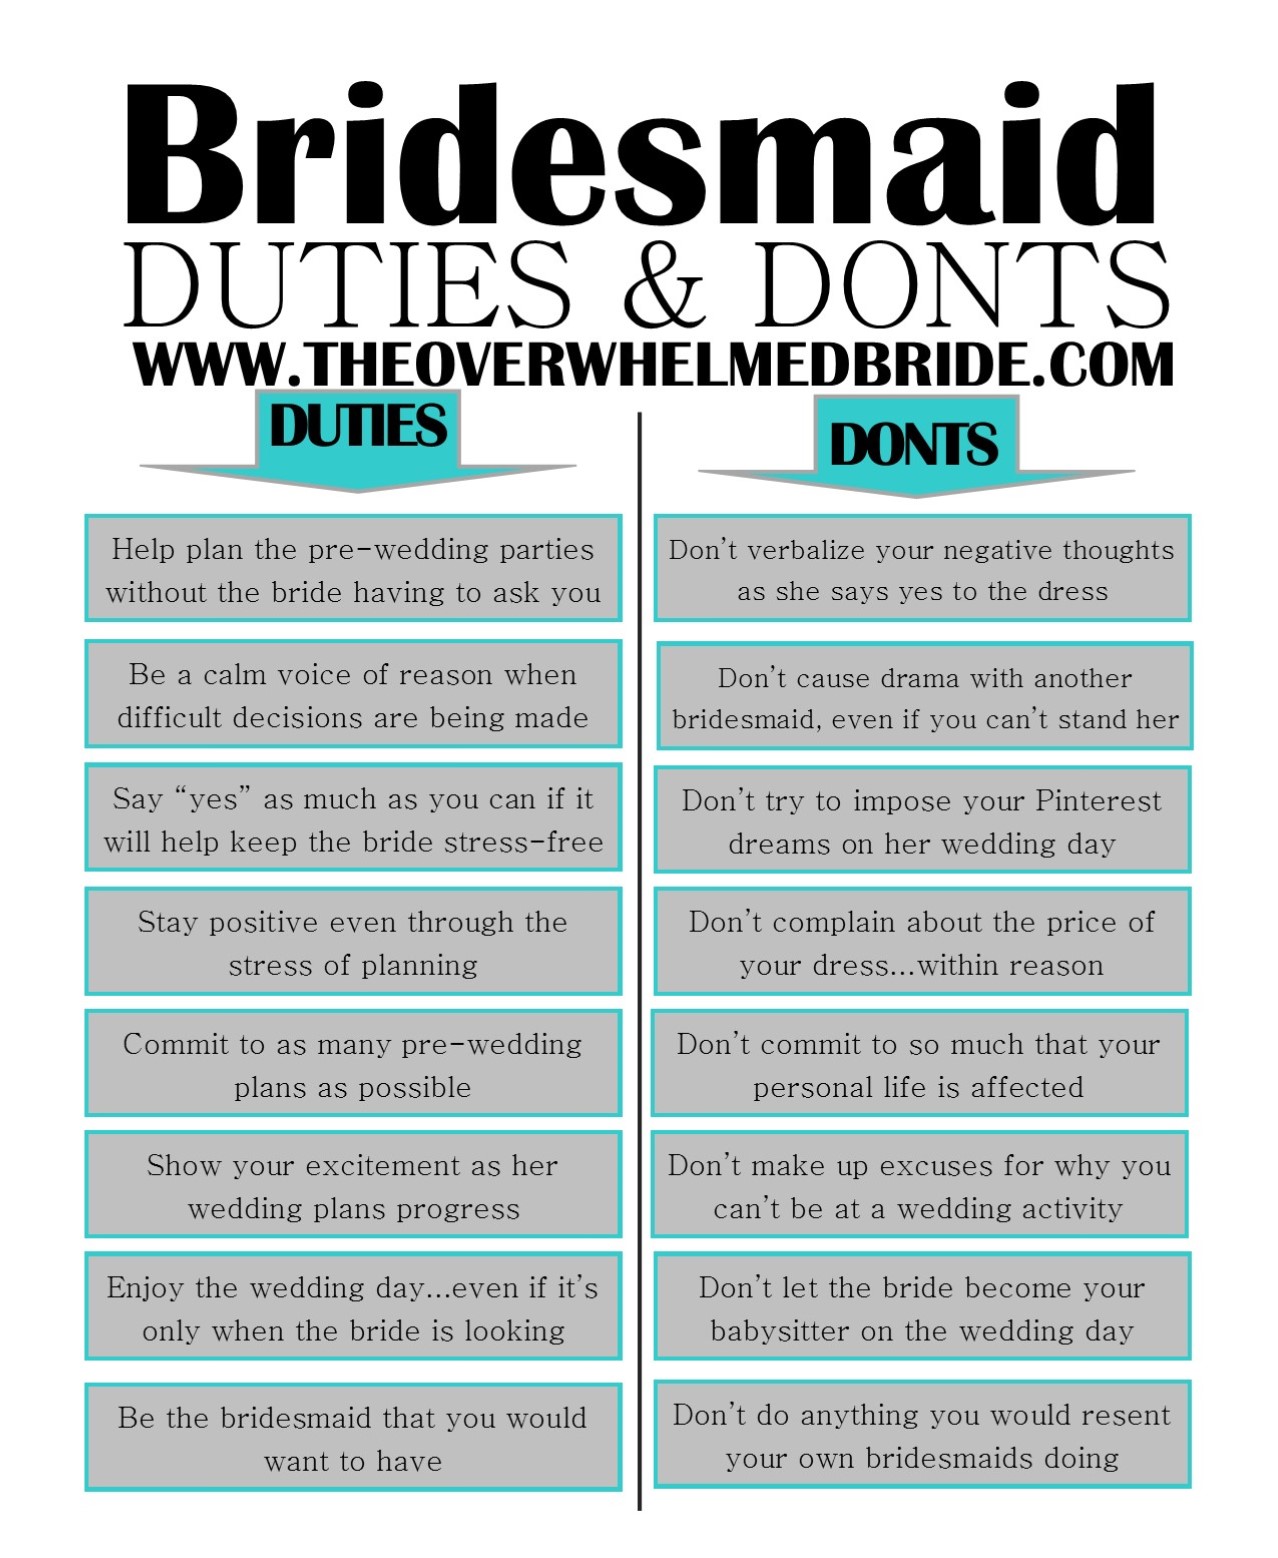 Sundays Most Loved Bridesmaid Duties Donts — The Overwhelmed Bride Wedding Blog